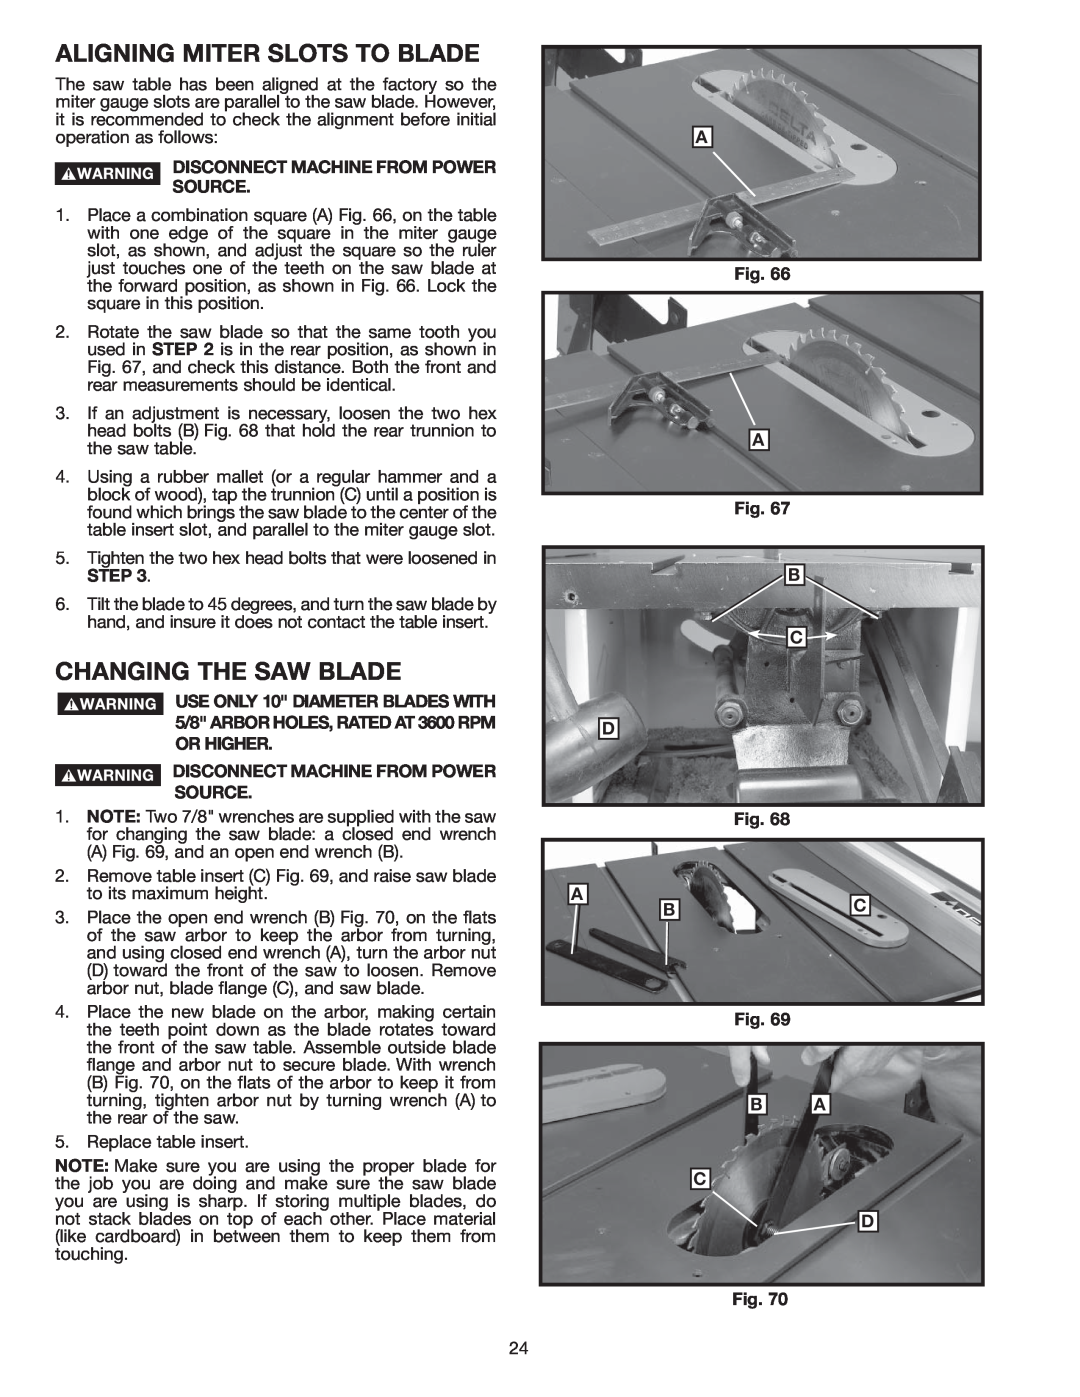 Delta 36-978 instruction manual Aligning Miter Slots To Blade, Changing The Saw Blade 